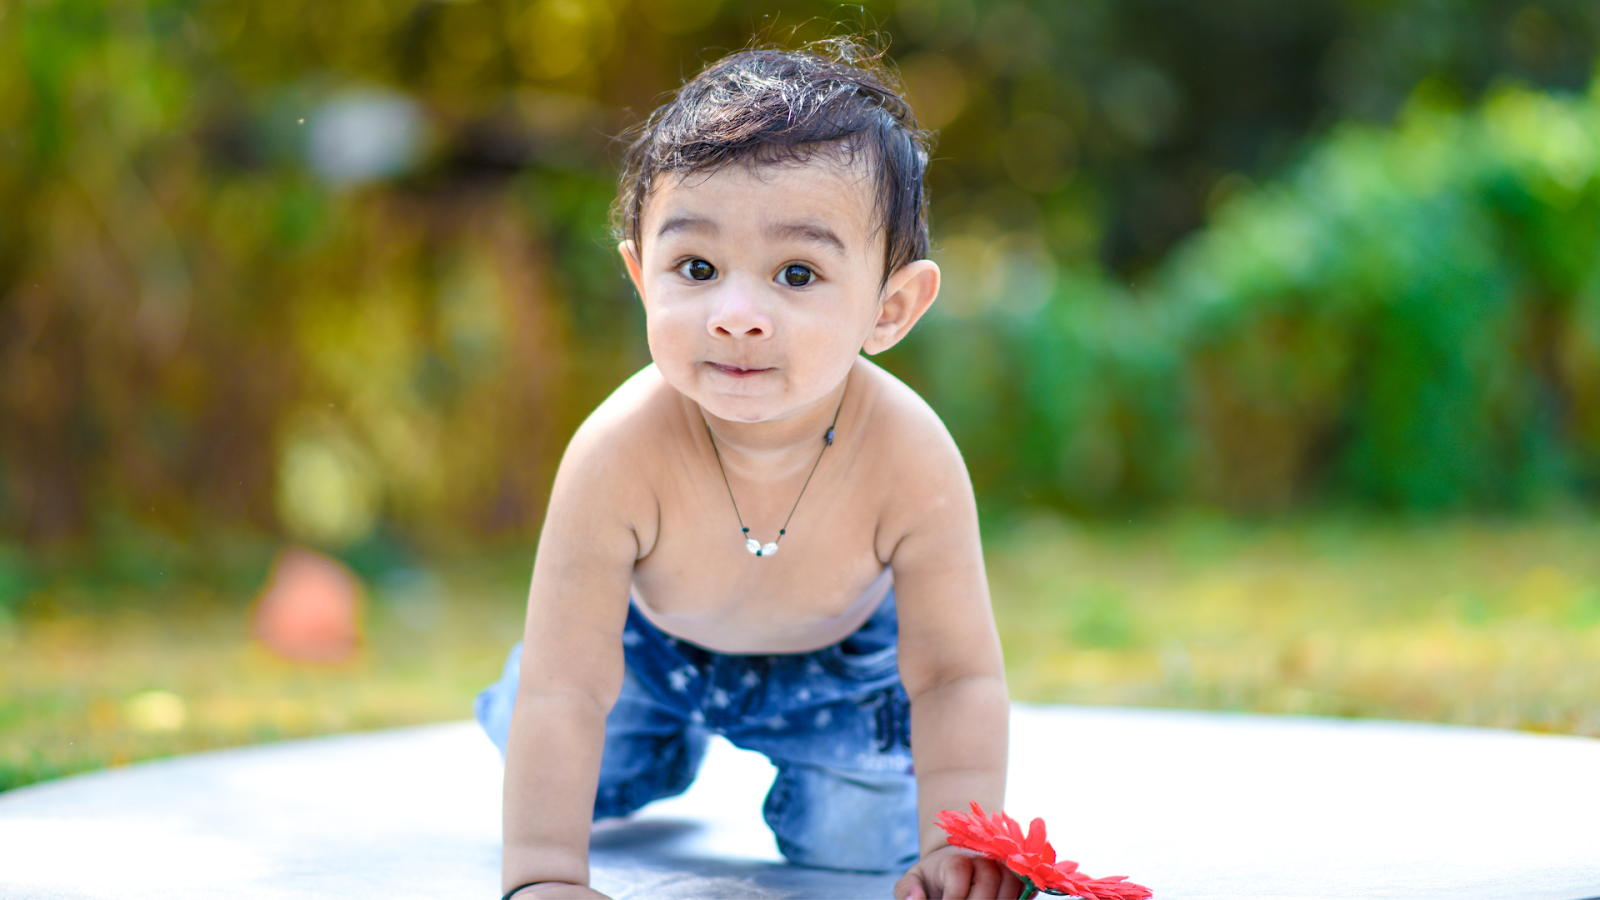 A Baby crawling on a playmat in a park. Baby-led Parenting helps babies grow at their own pace.